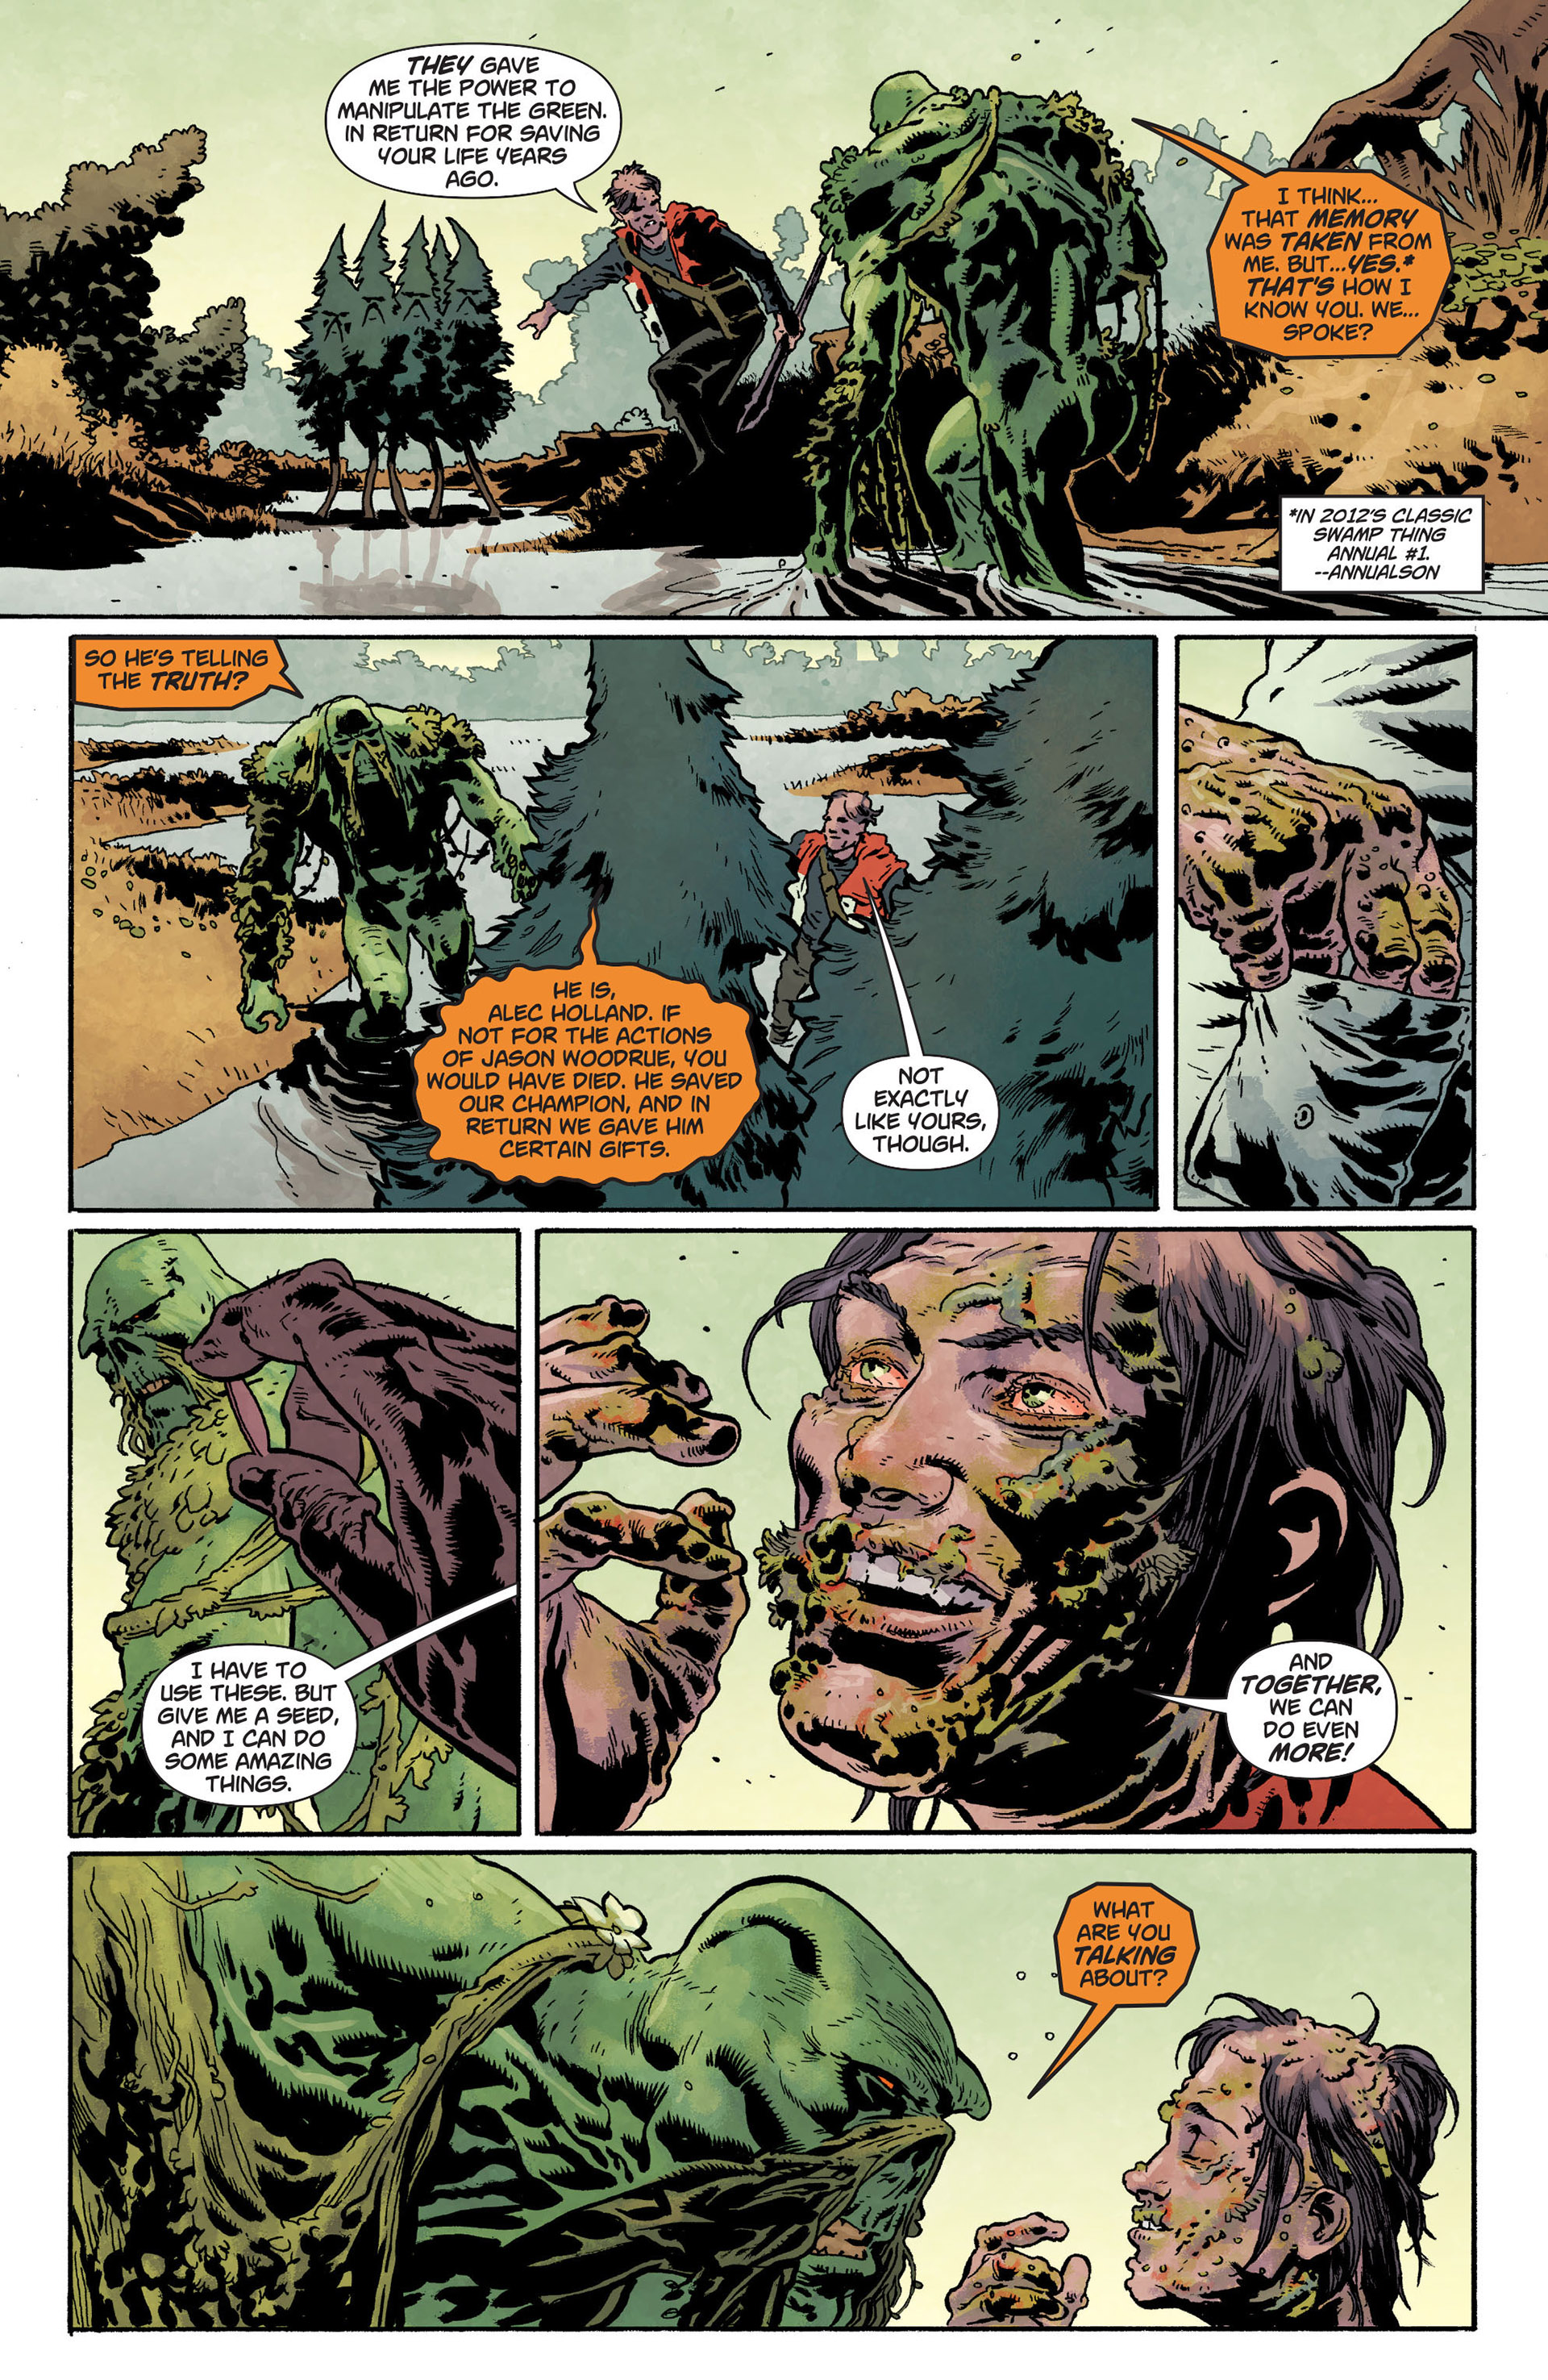 Swamp Thing (2011) 24 Page 10.